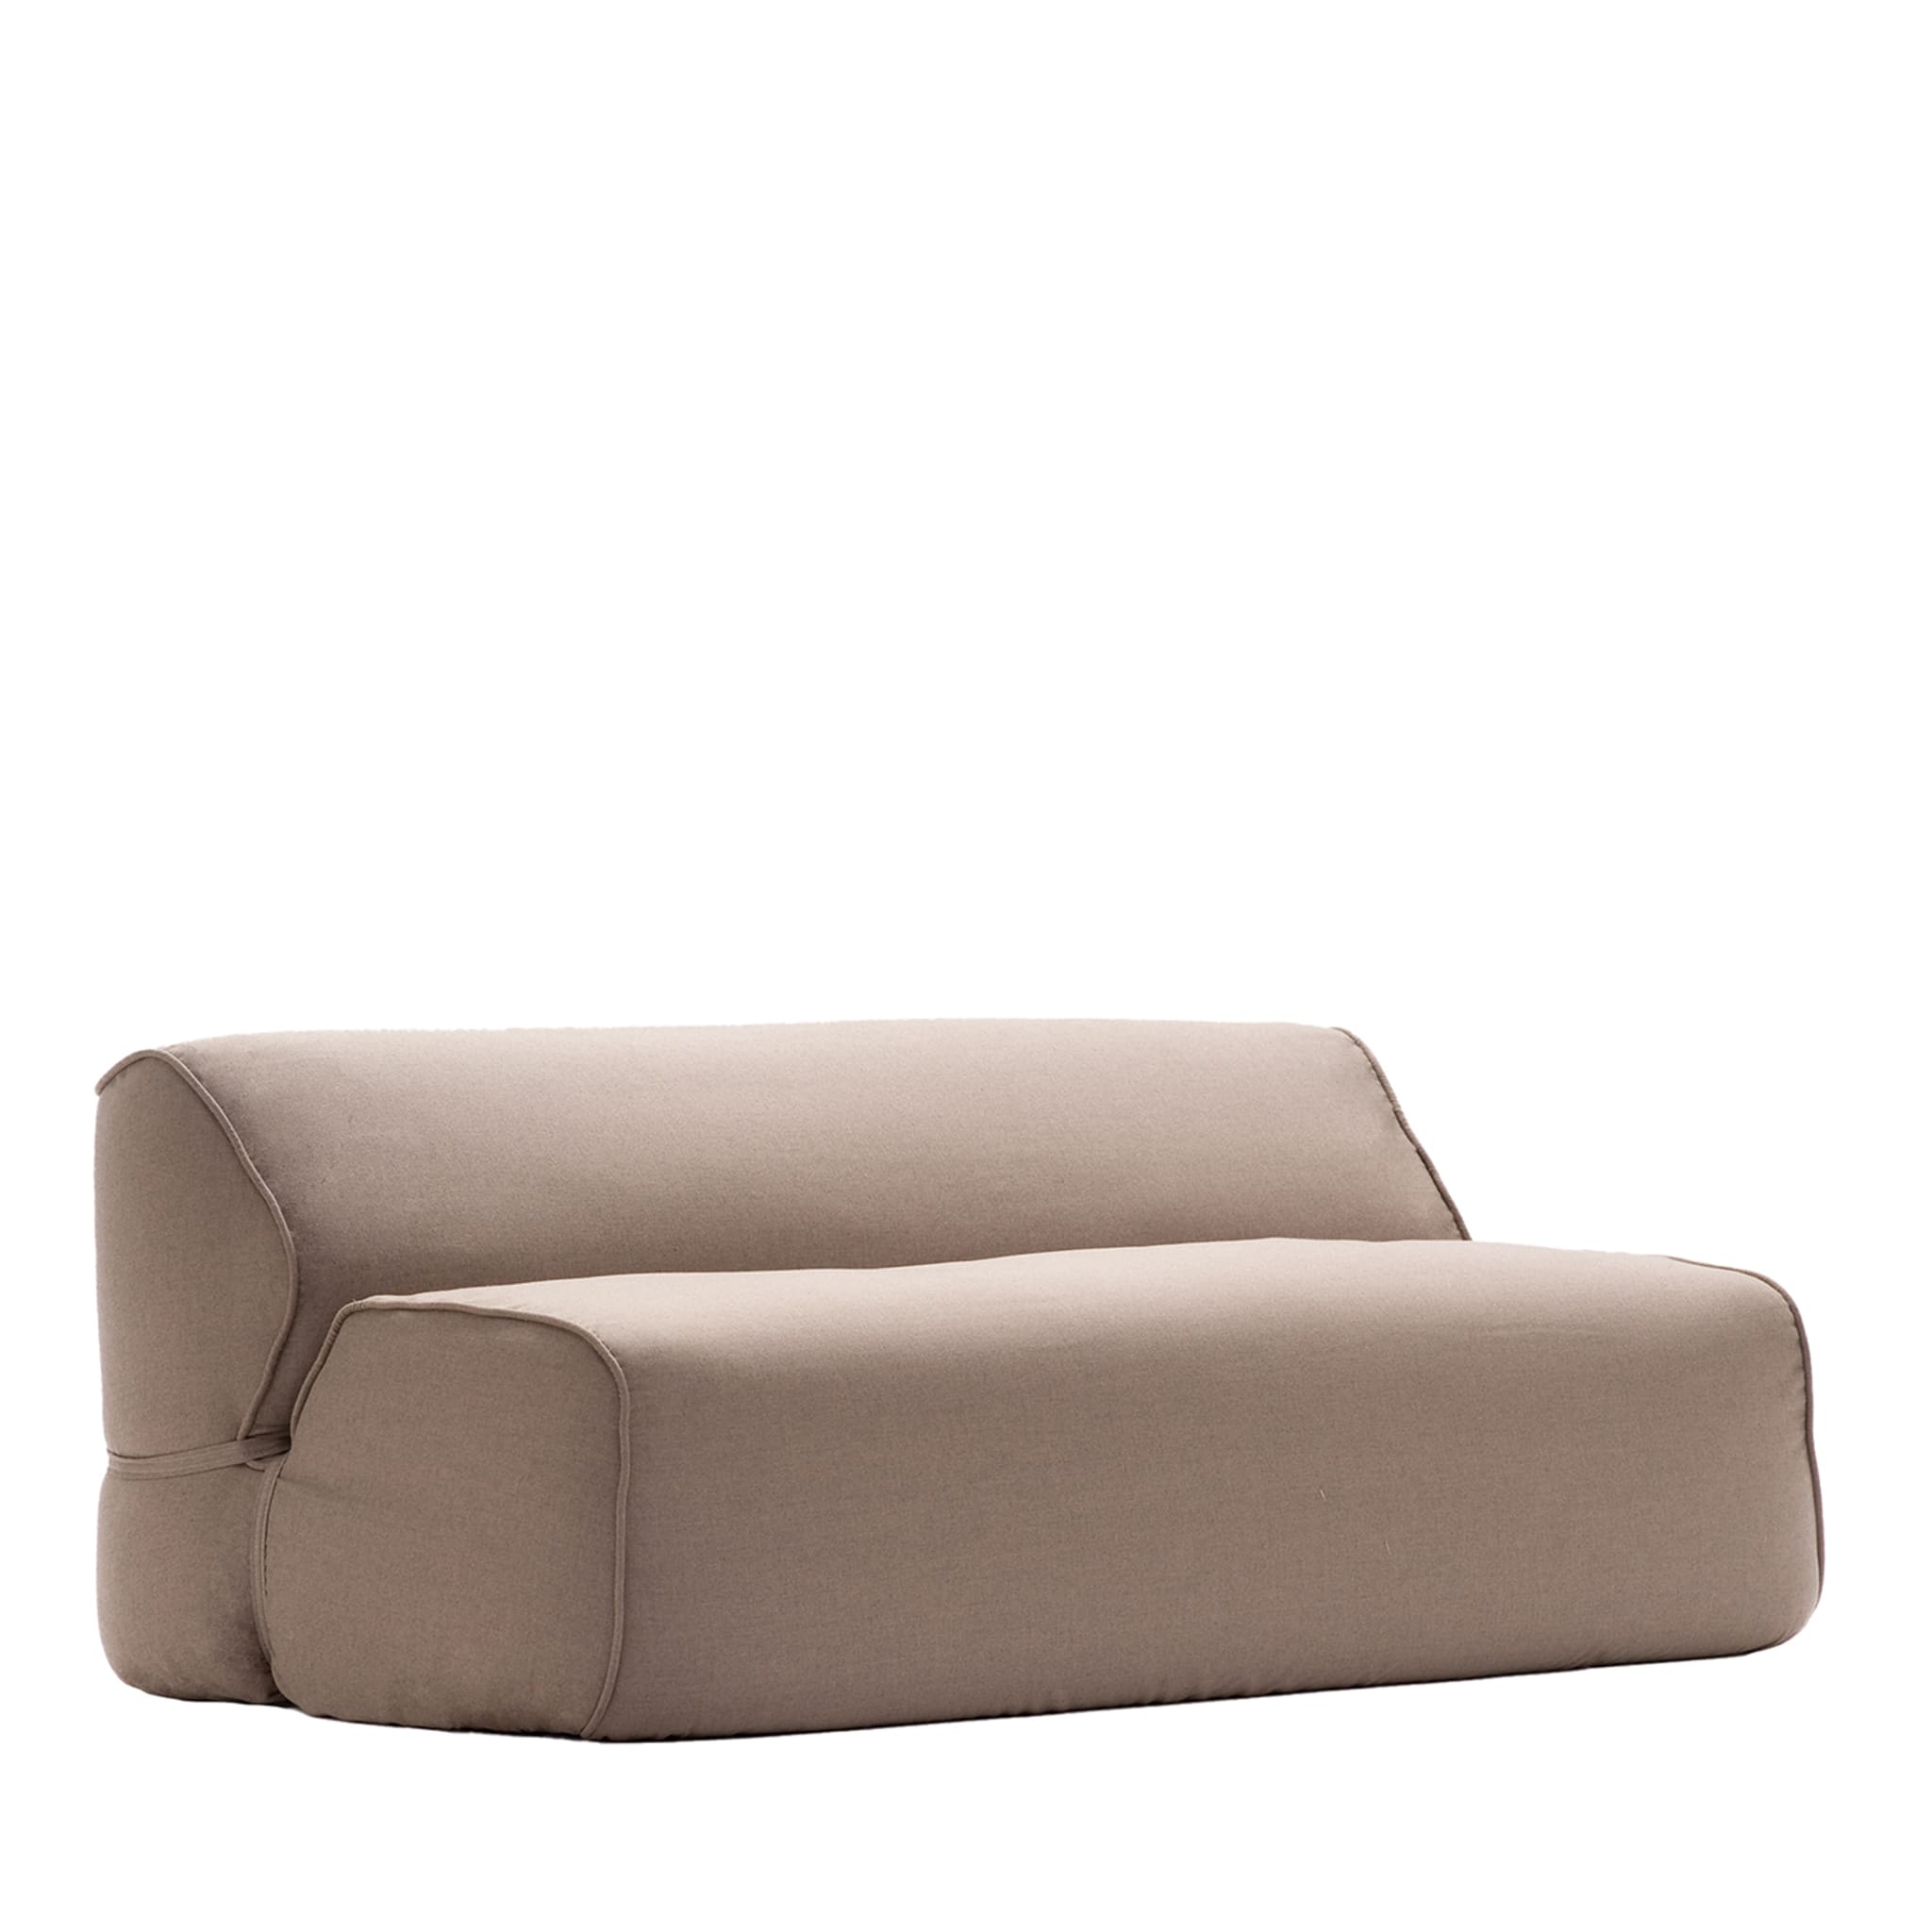 Soft Sofa 210 by Ludovica and Roberto Palomba - Main view